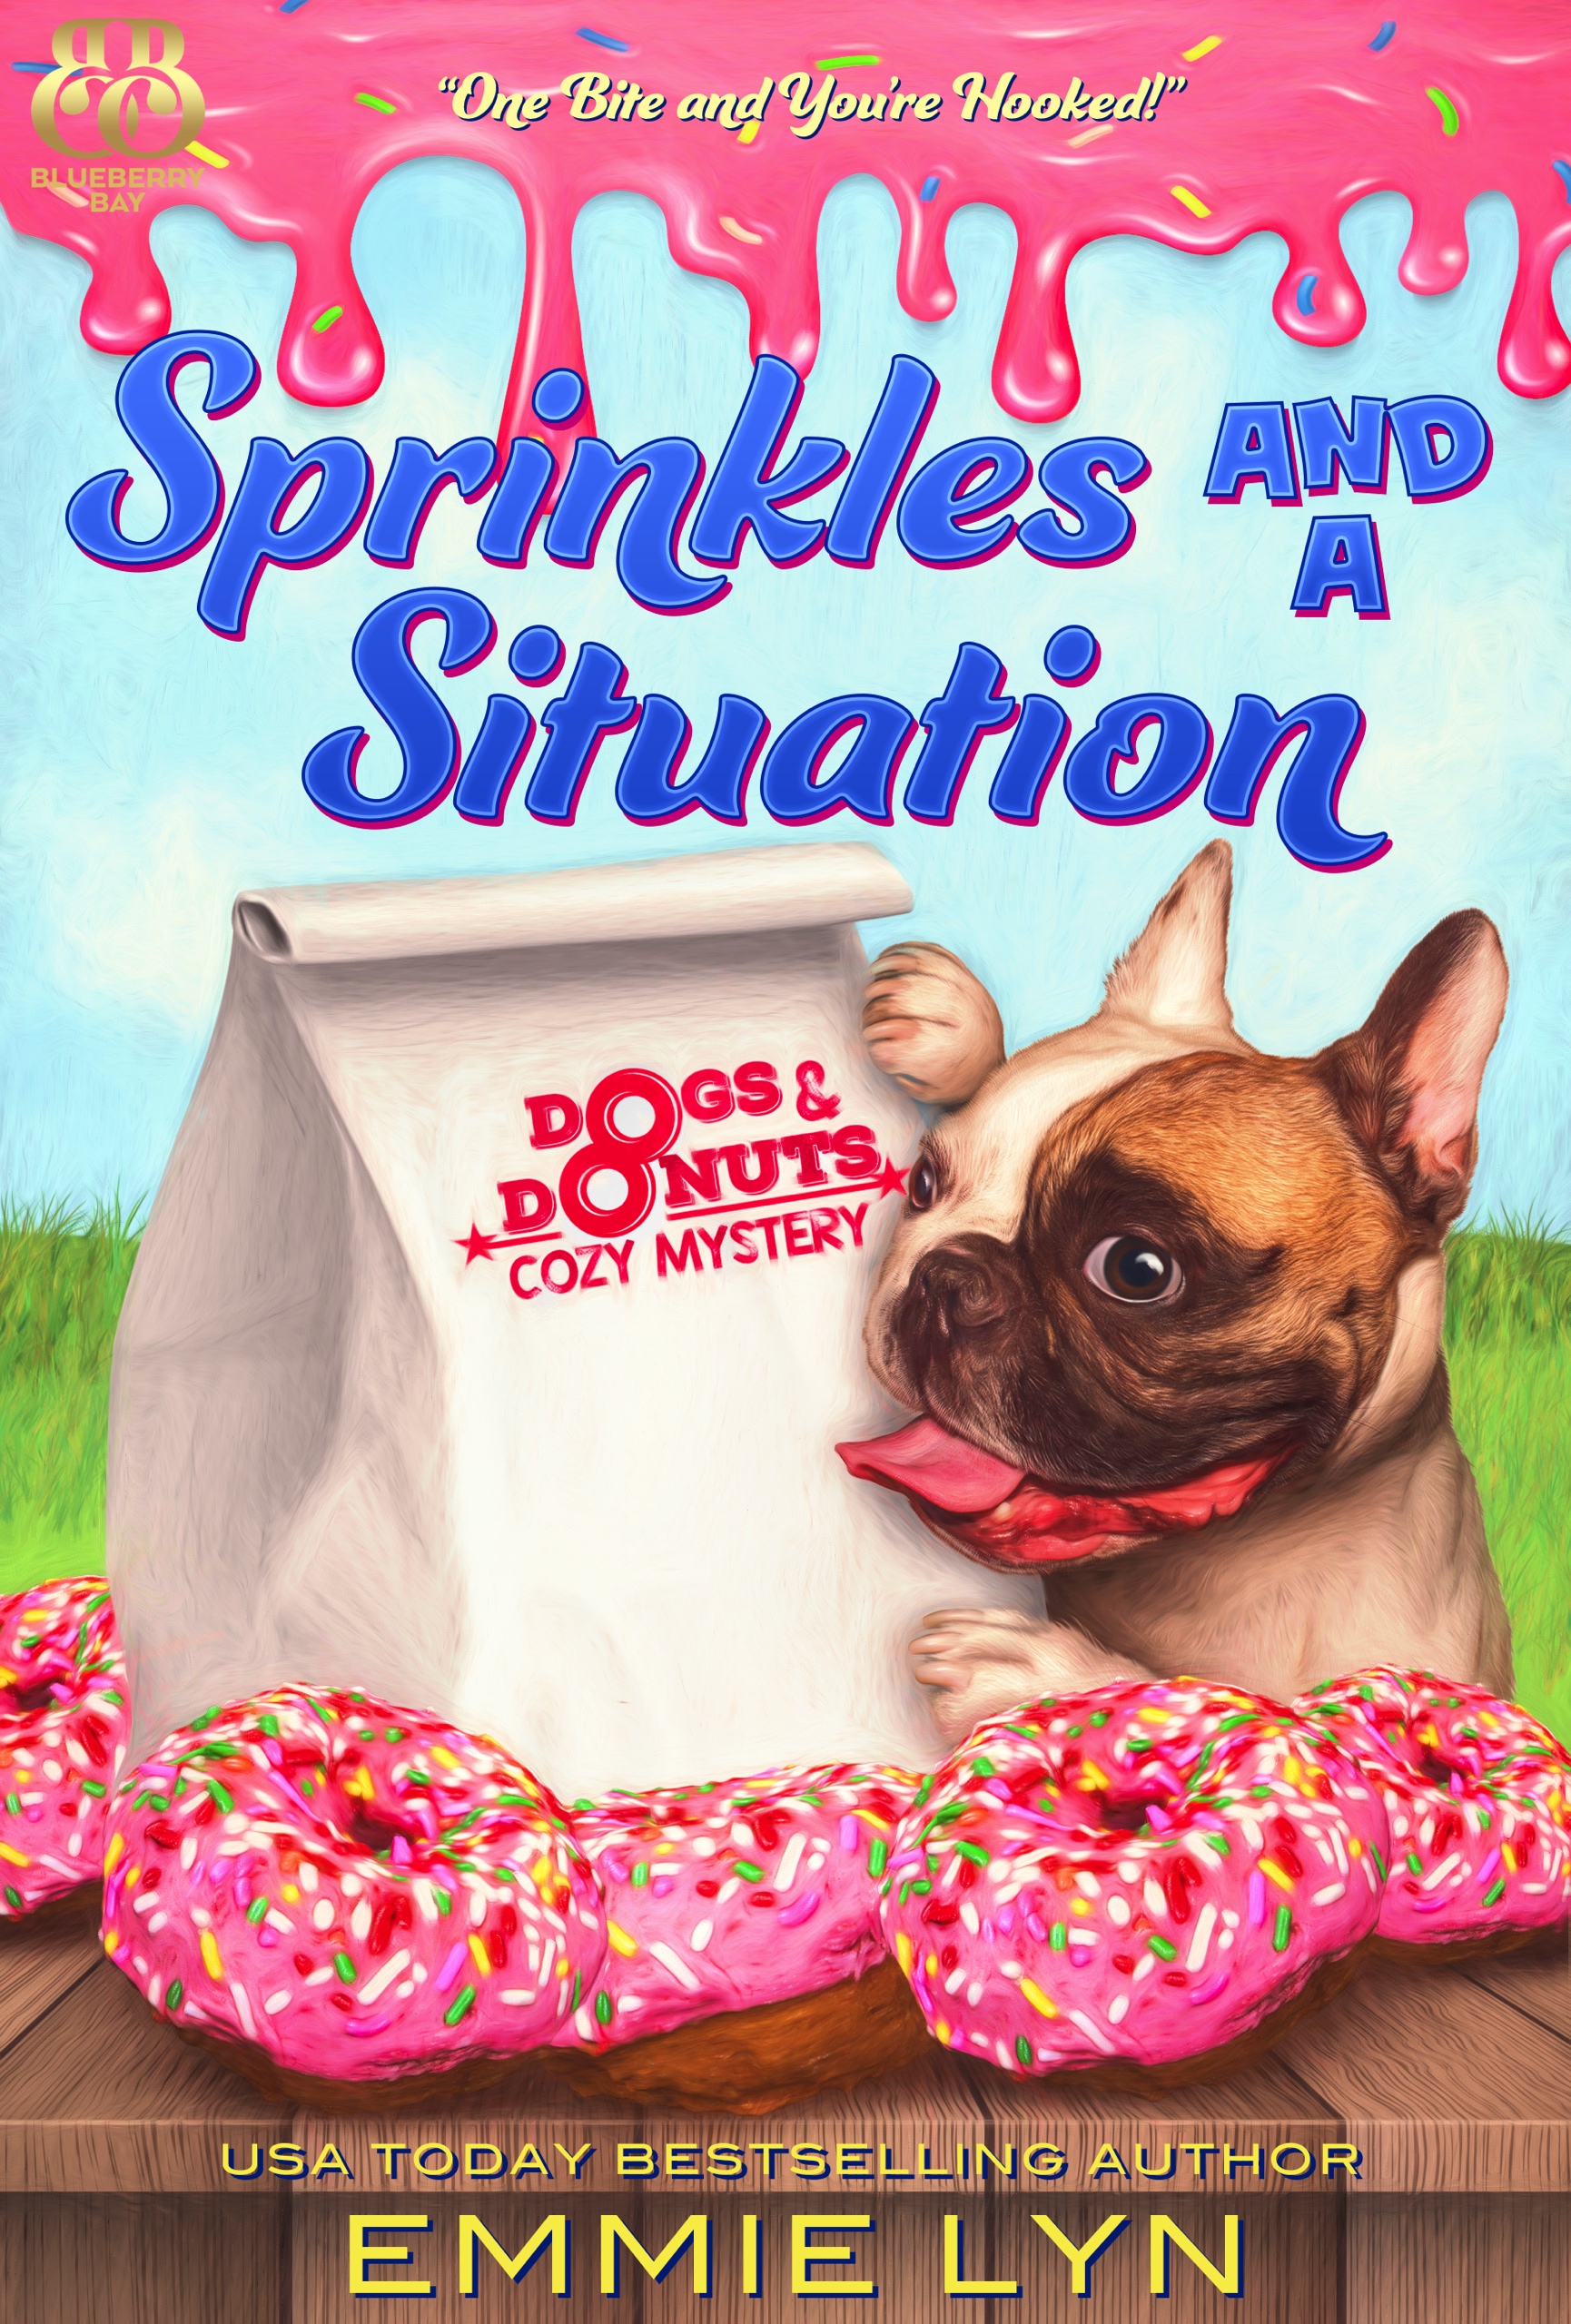 Sprinkles and a Situation